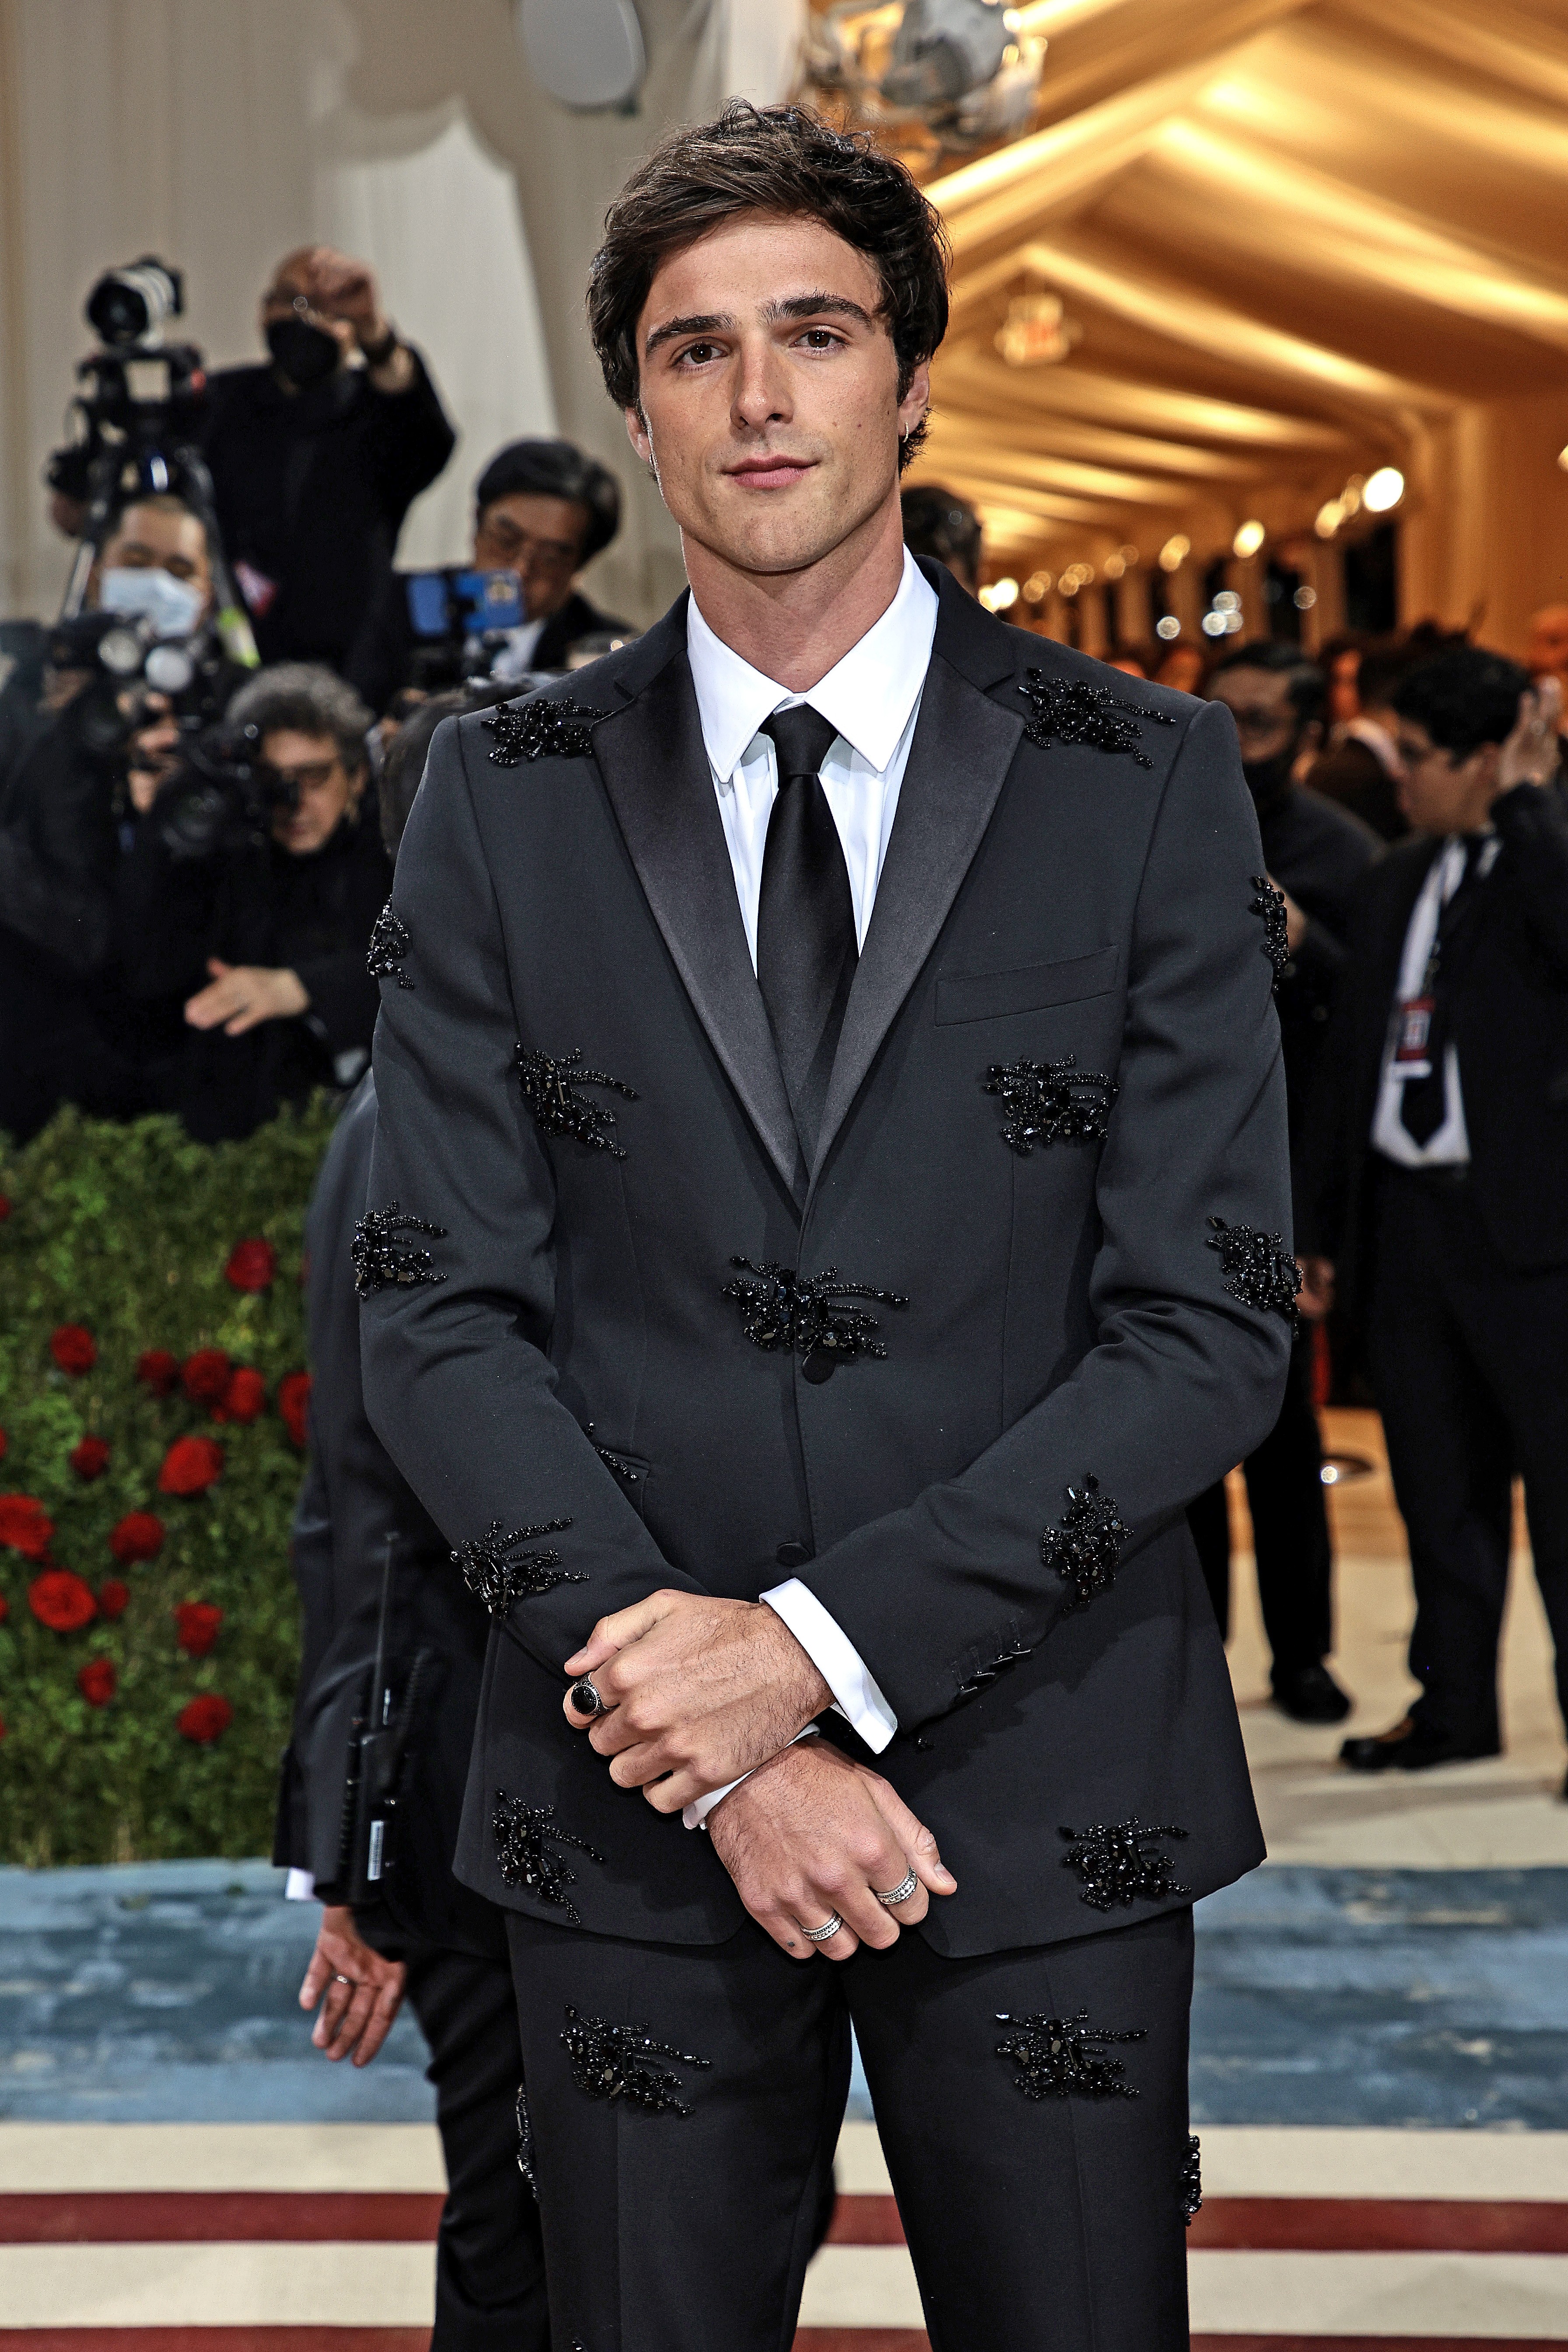 NEW YORK, NEW YORK - MAY 02: Jacob Elordi attends The 2022 Met Gala Celebrating "In America: An Anthology of Fashion" at The Metropolitan Museum of Art on May 02, 2022 in New York City. (Photo by Dimitrios Kambouris/Getty Images for The Met Museum/Vogue) (Foto: Getty Images for The Met Museum/)